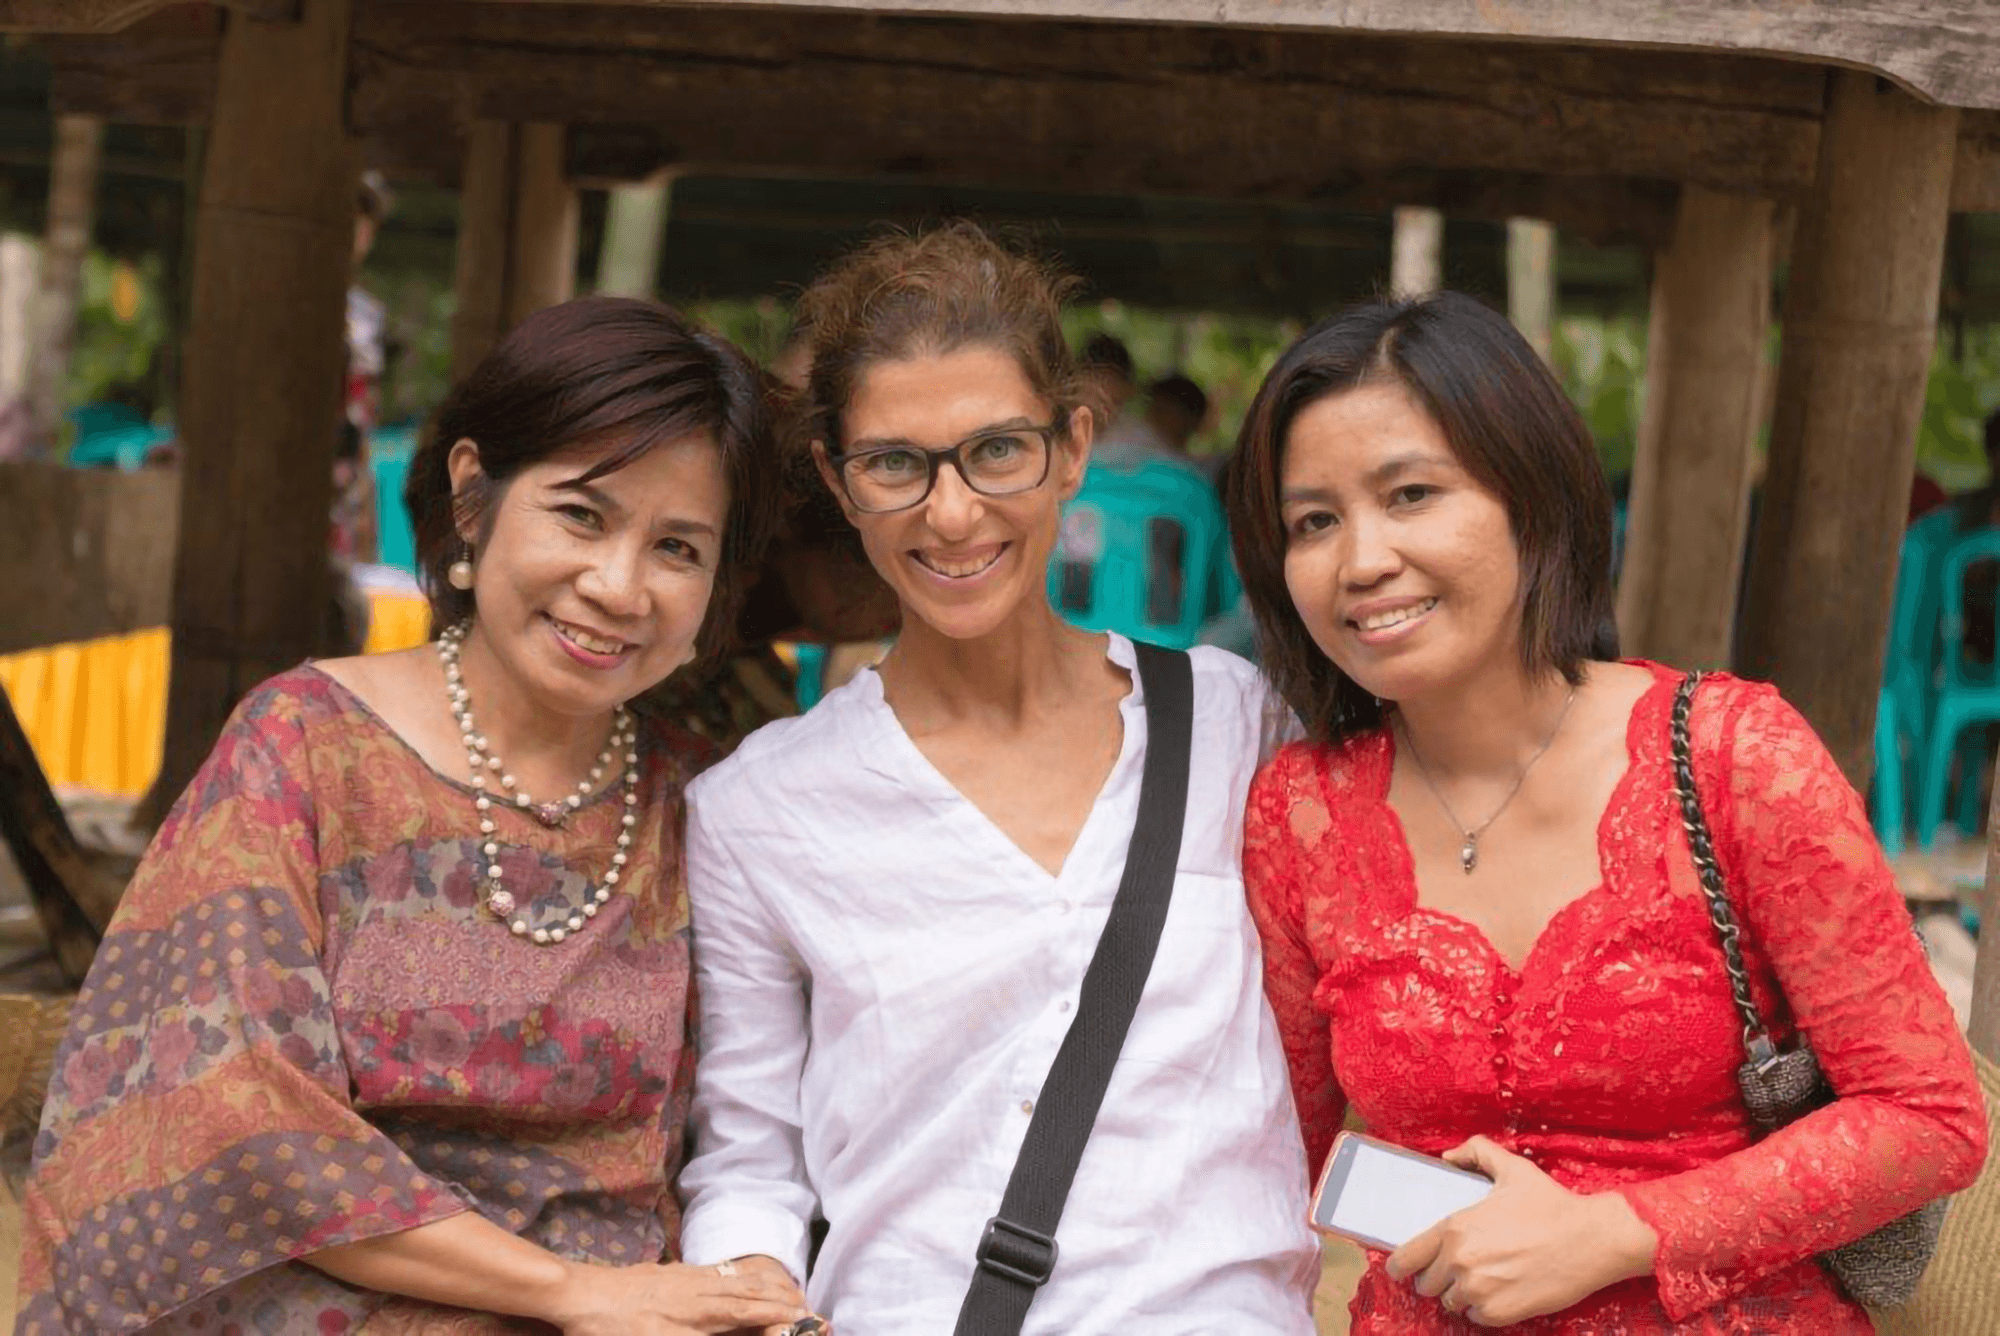 Three multiracial middle-aged women standing together and smiling.